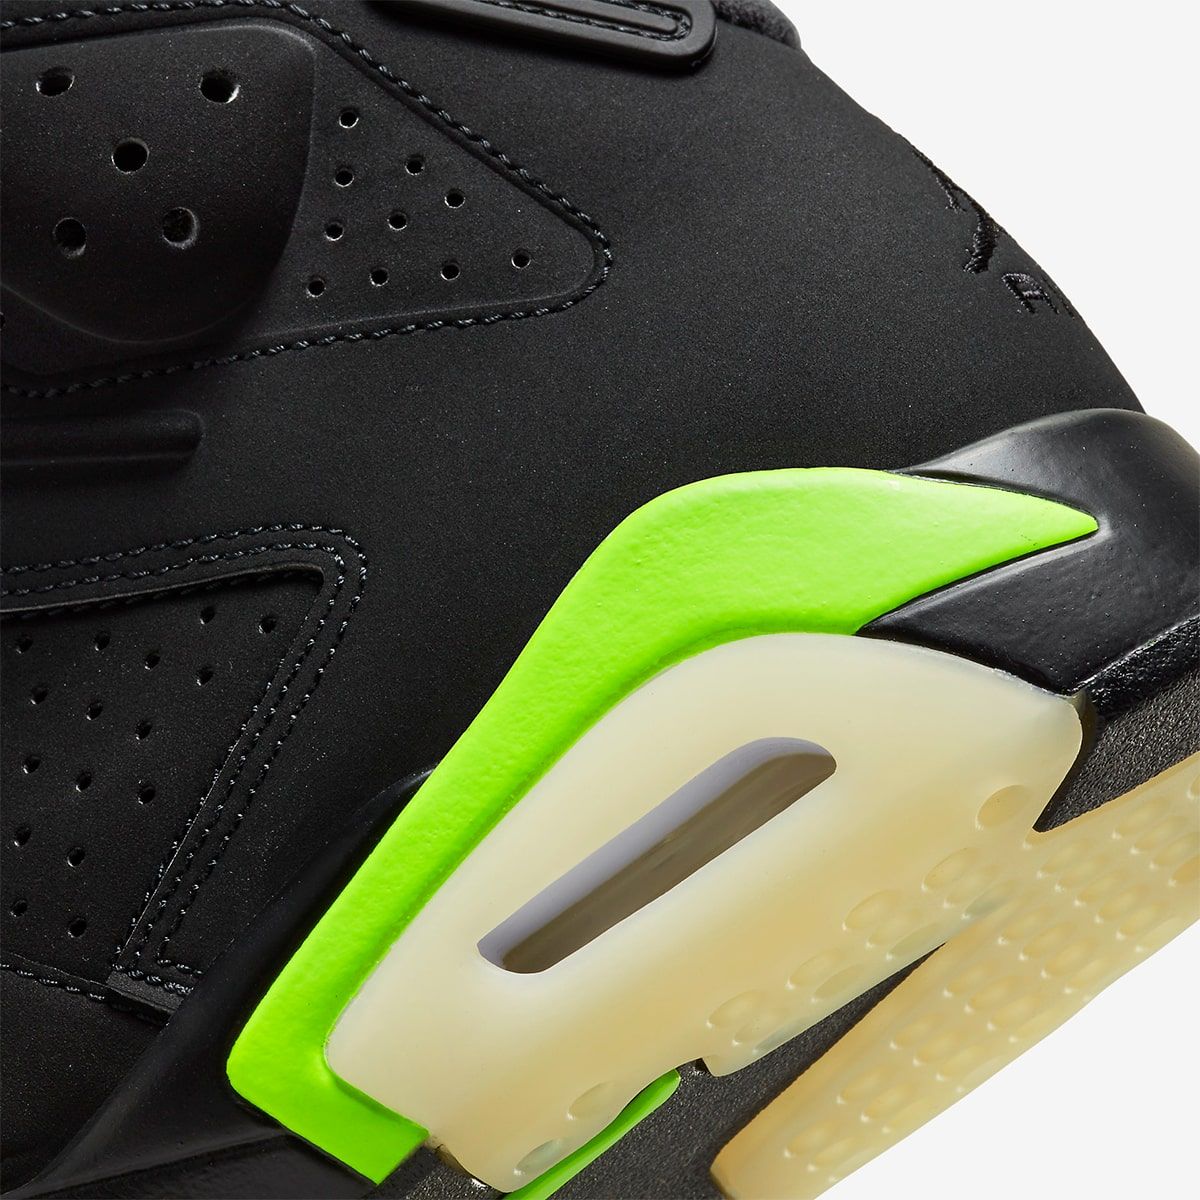 Where to Buy the Air Jordan 6 “Electric Green” | HOUSE OF HEAT